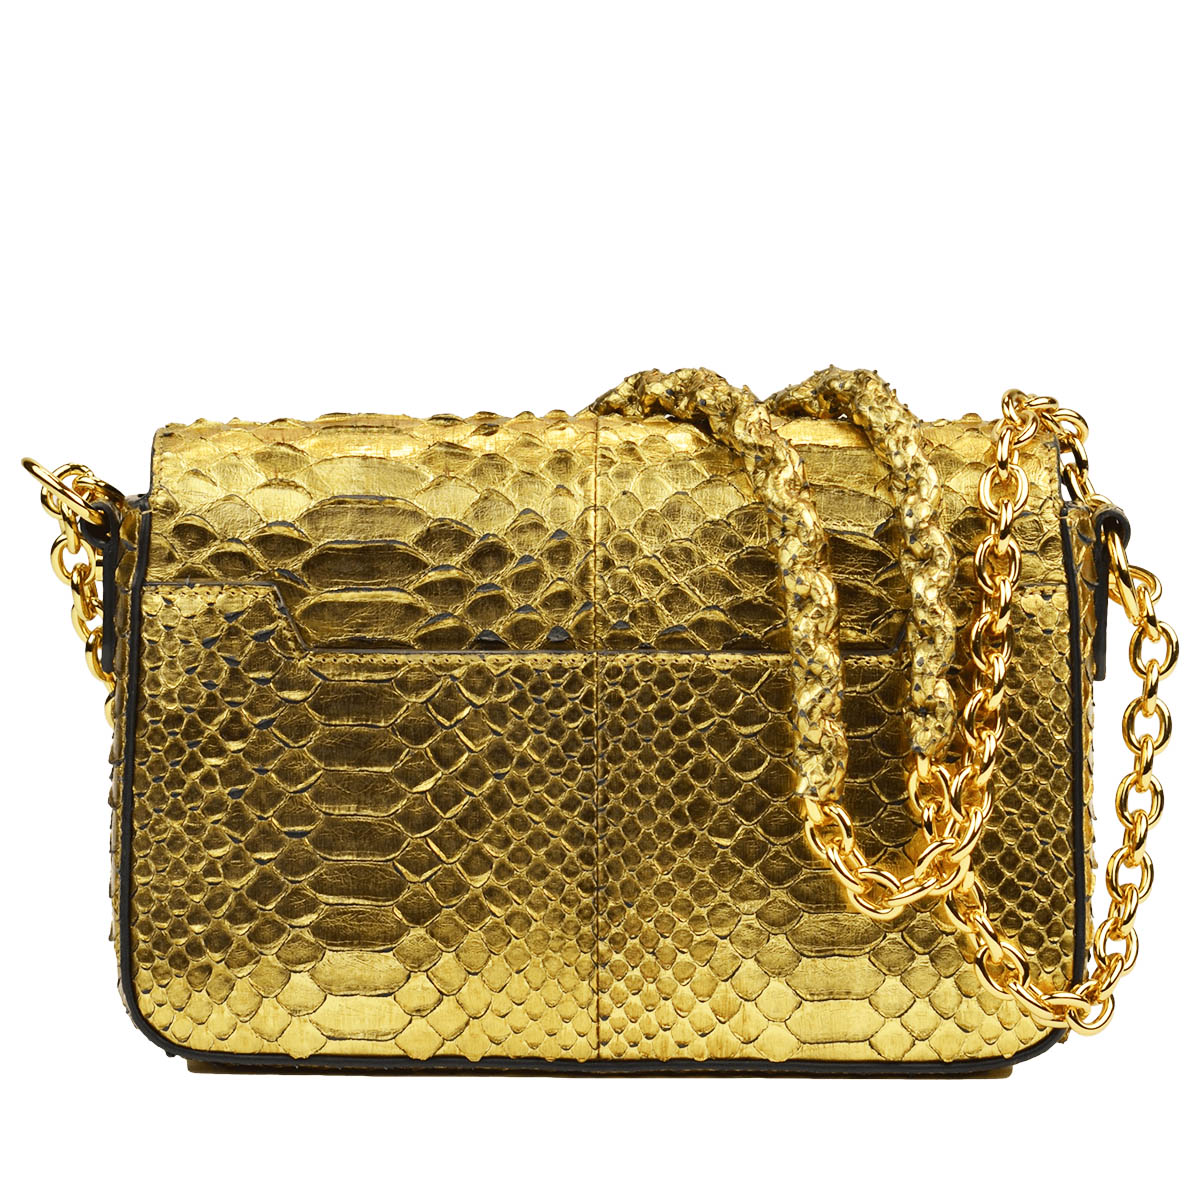 TOM FORD on X: The Natalia bag in metallic gold python, the ultimate gift:   #TOMFORD #NATALIA #TFHOLIDAY   / X